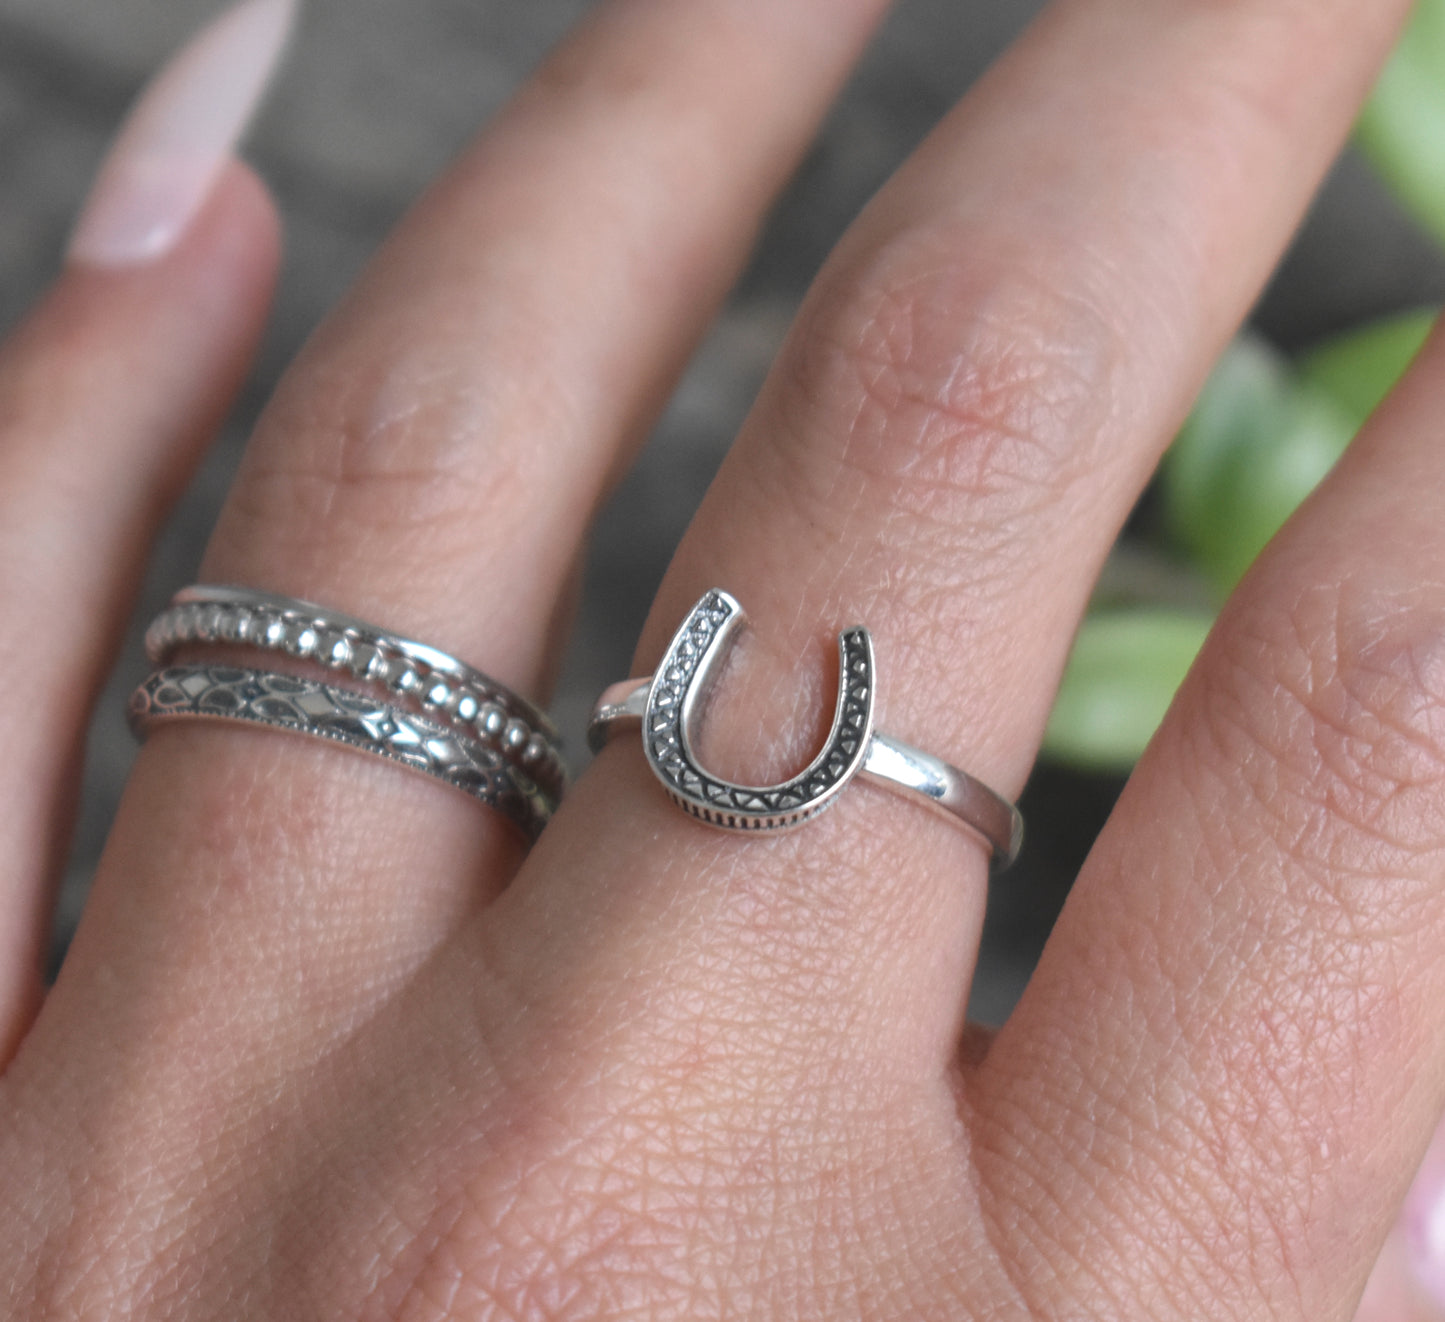 Horseshoe Ring- Lucky Horseshoe, Sterling Silver Ring, Good Luck Ring, Equestrian